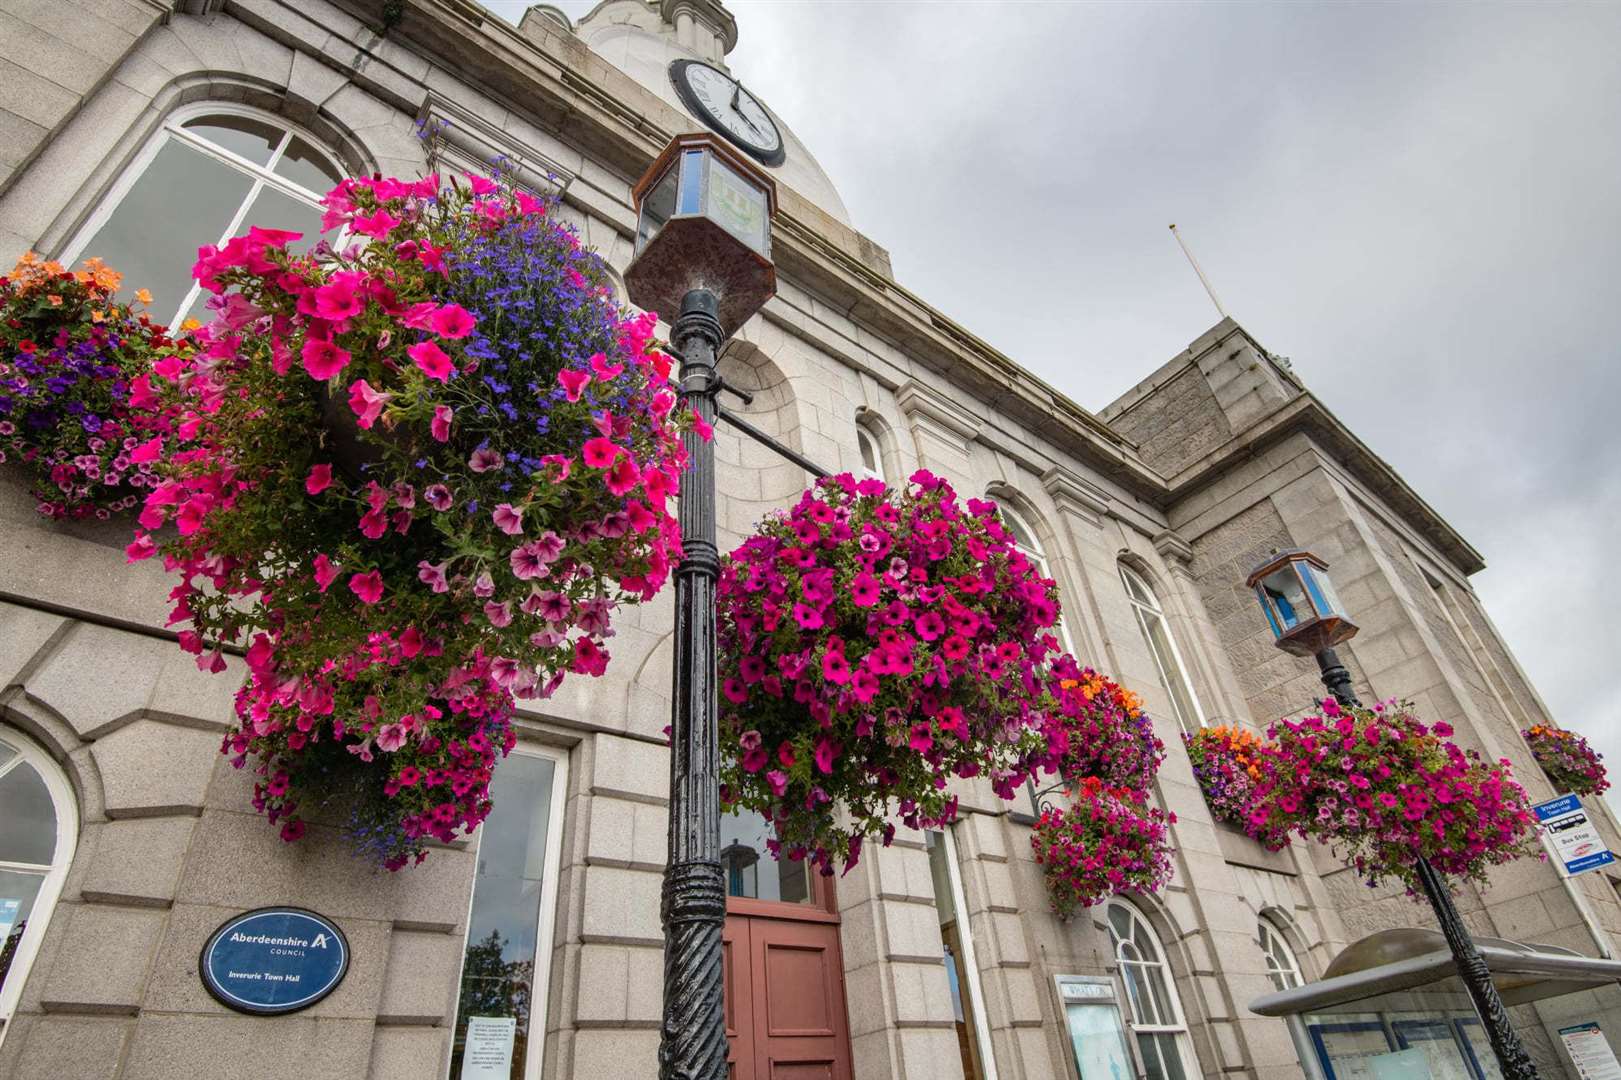 Inverurie Town Hall is the centrepiece of the summer floral display.